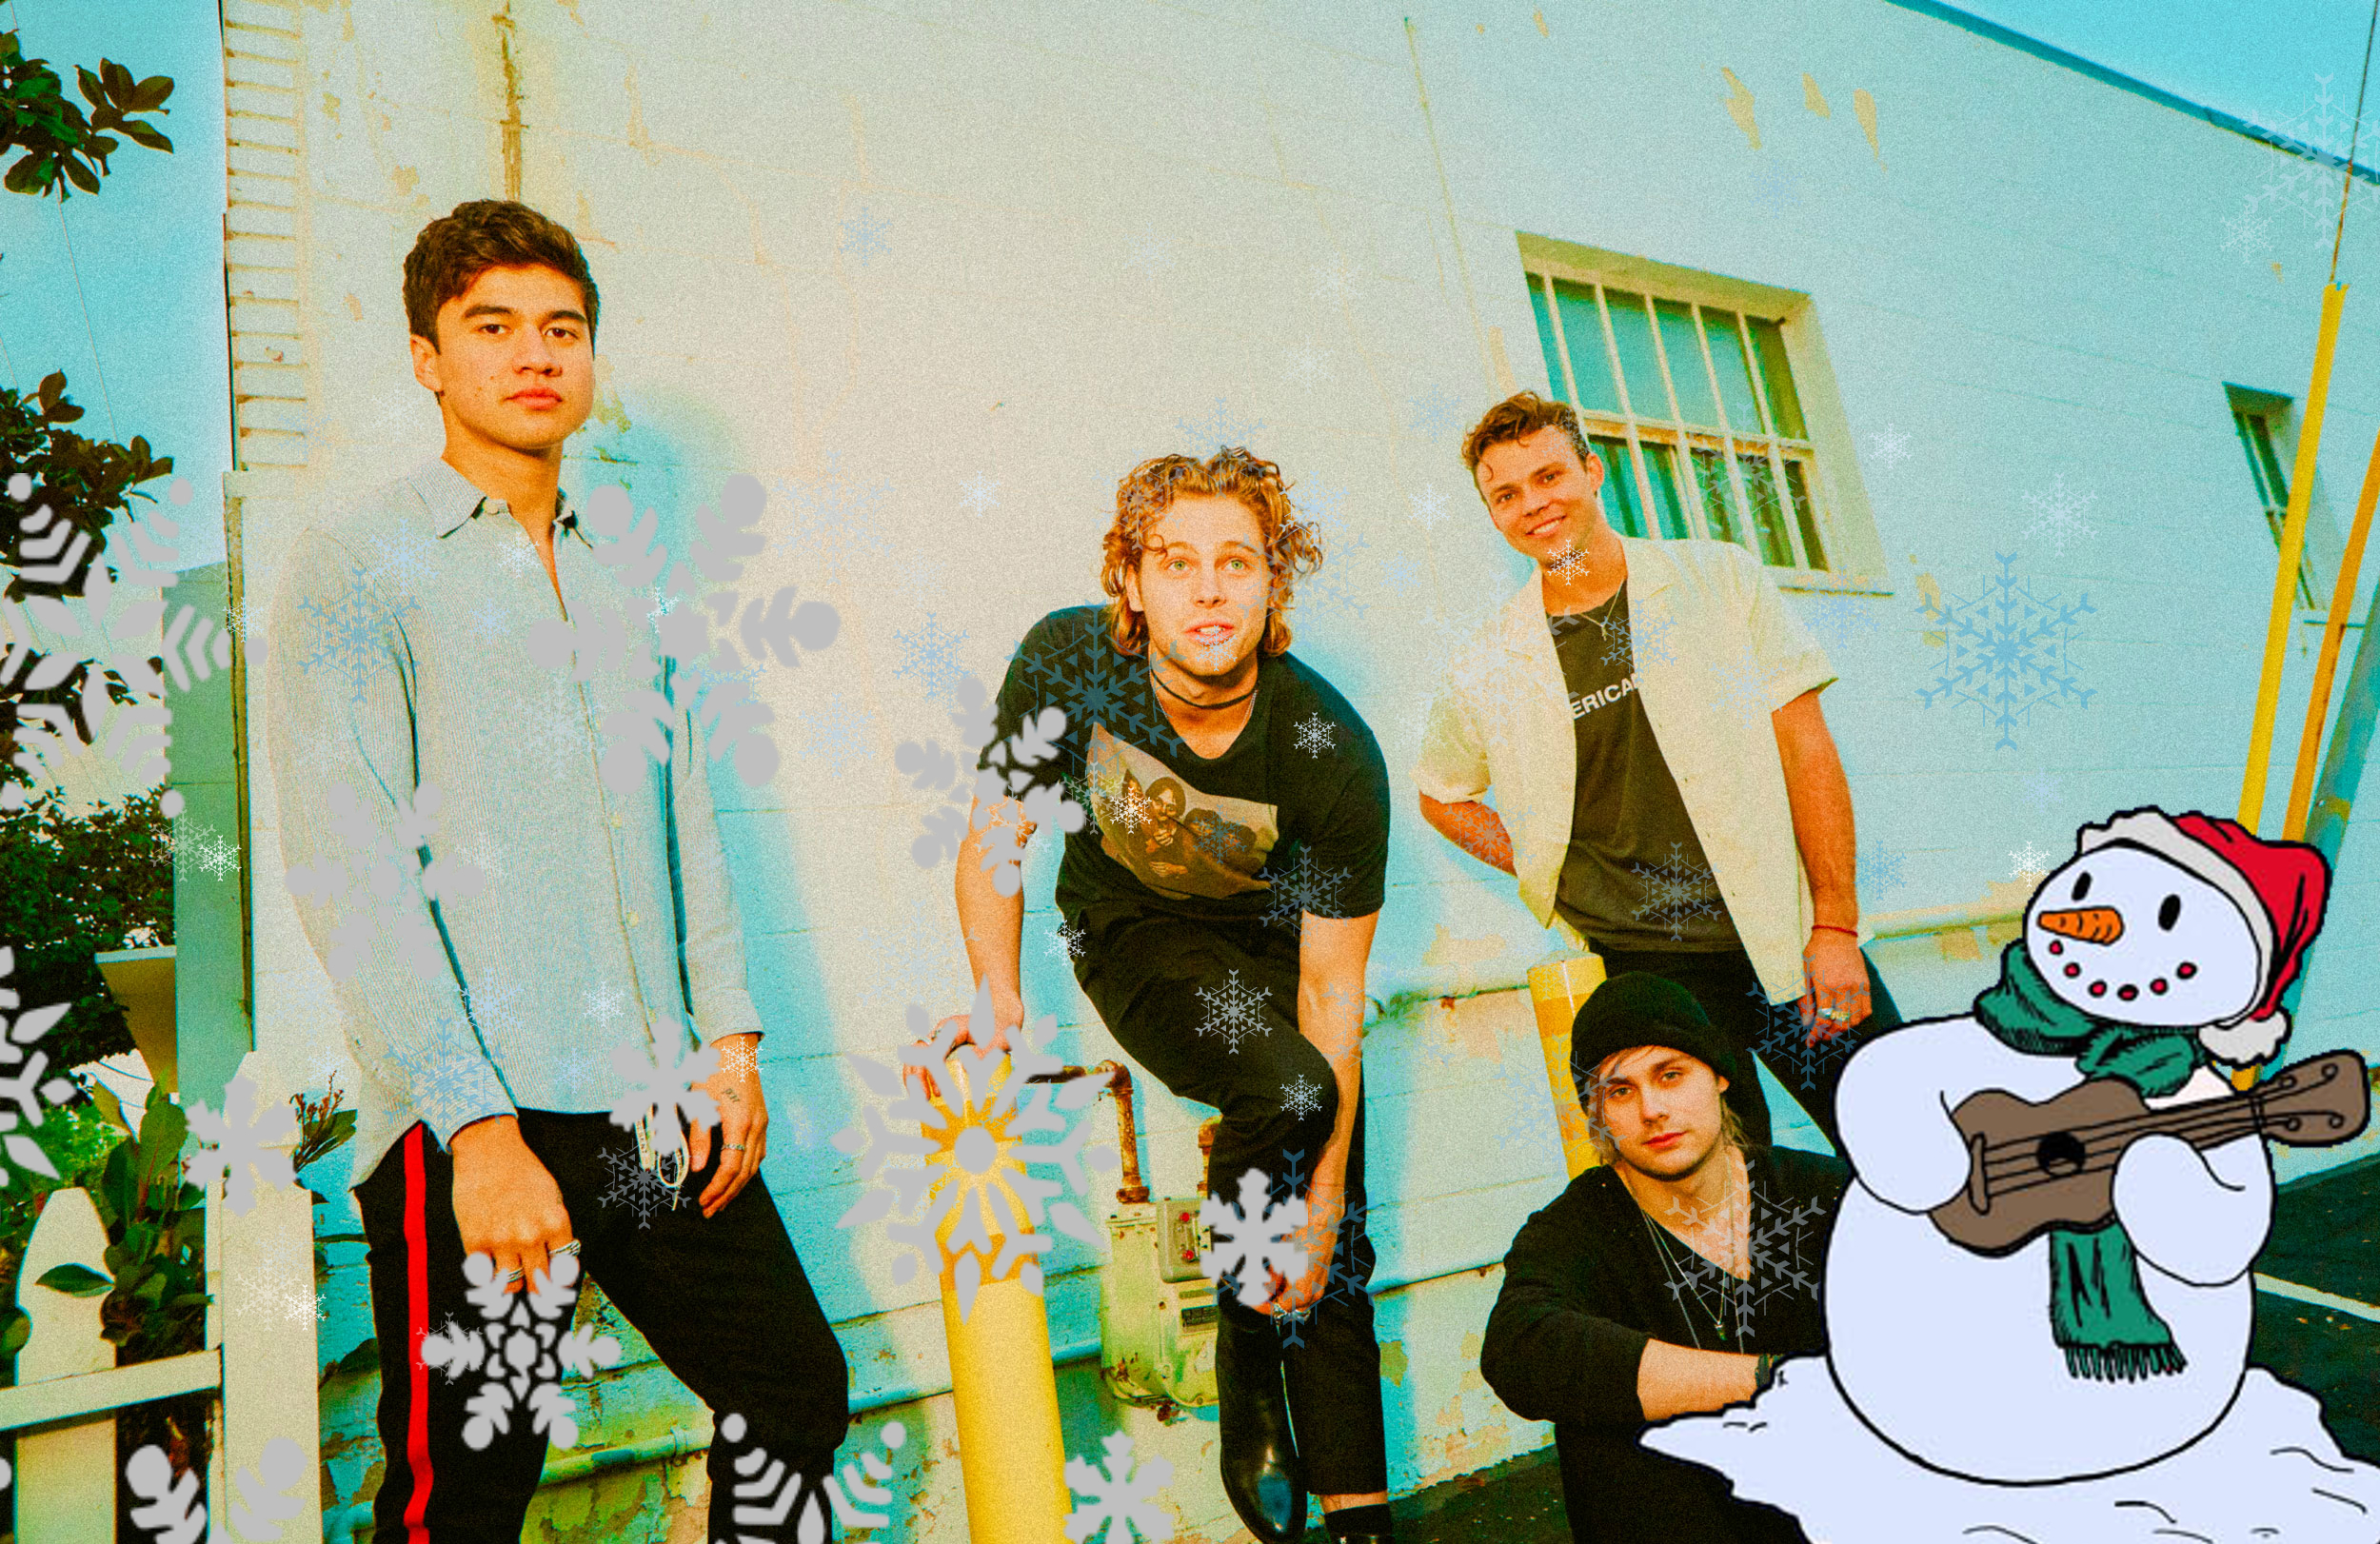 Aussie artists warm up Spotify’s most-streamed tracks of winter, 5SOS tops the list